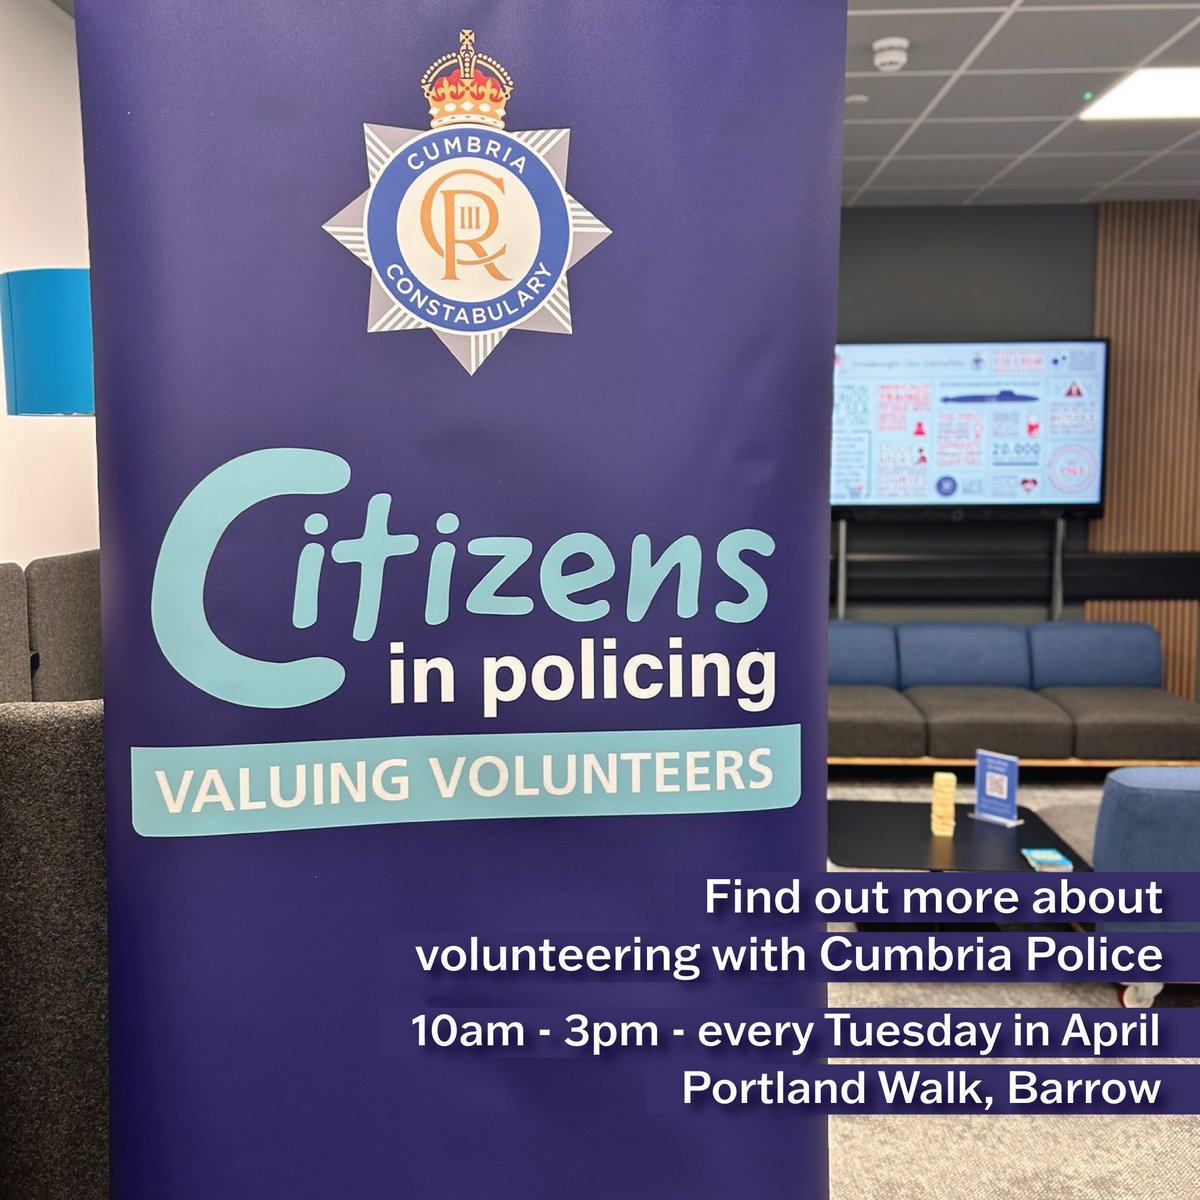 Our Citizens in Policing team are at the Career Inspiration Hub at Portland Walk, Barrow. Come and visit them to find out more about volunteering with Cumbria Police 👮 .